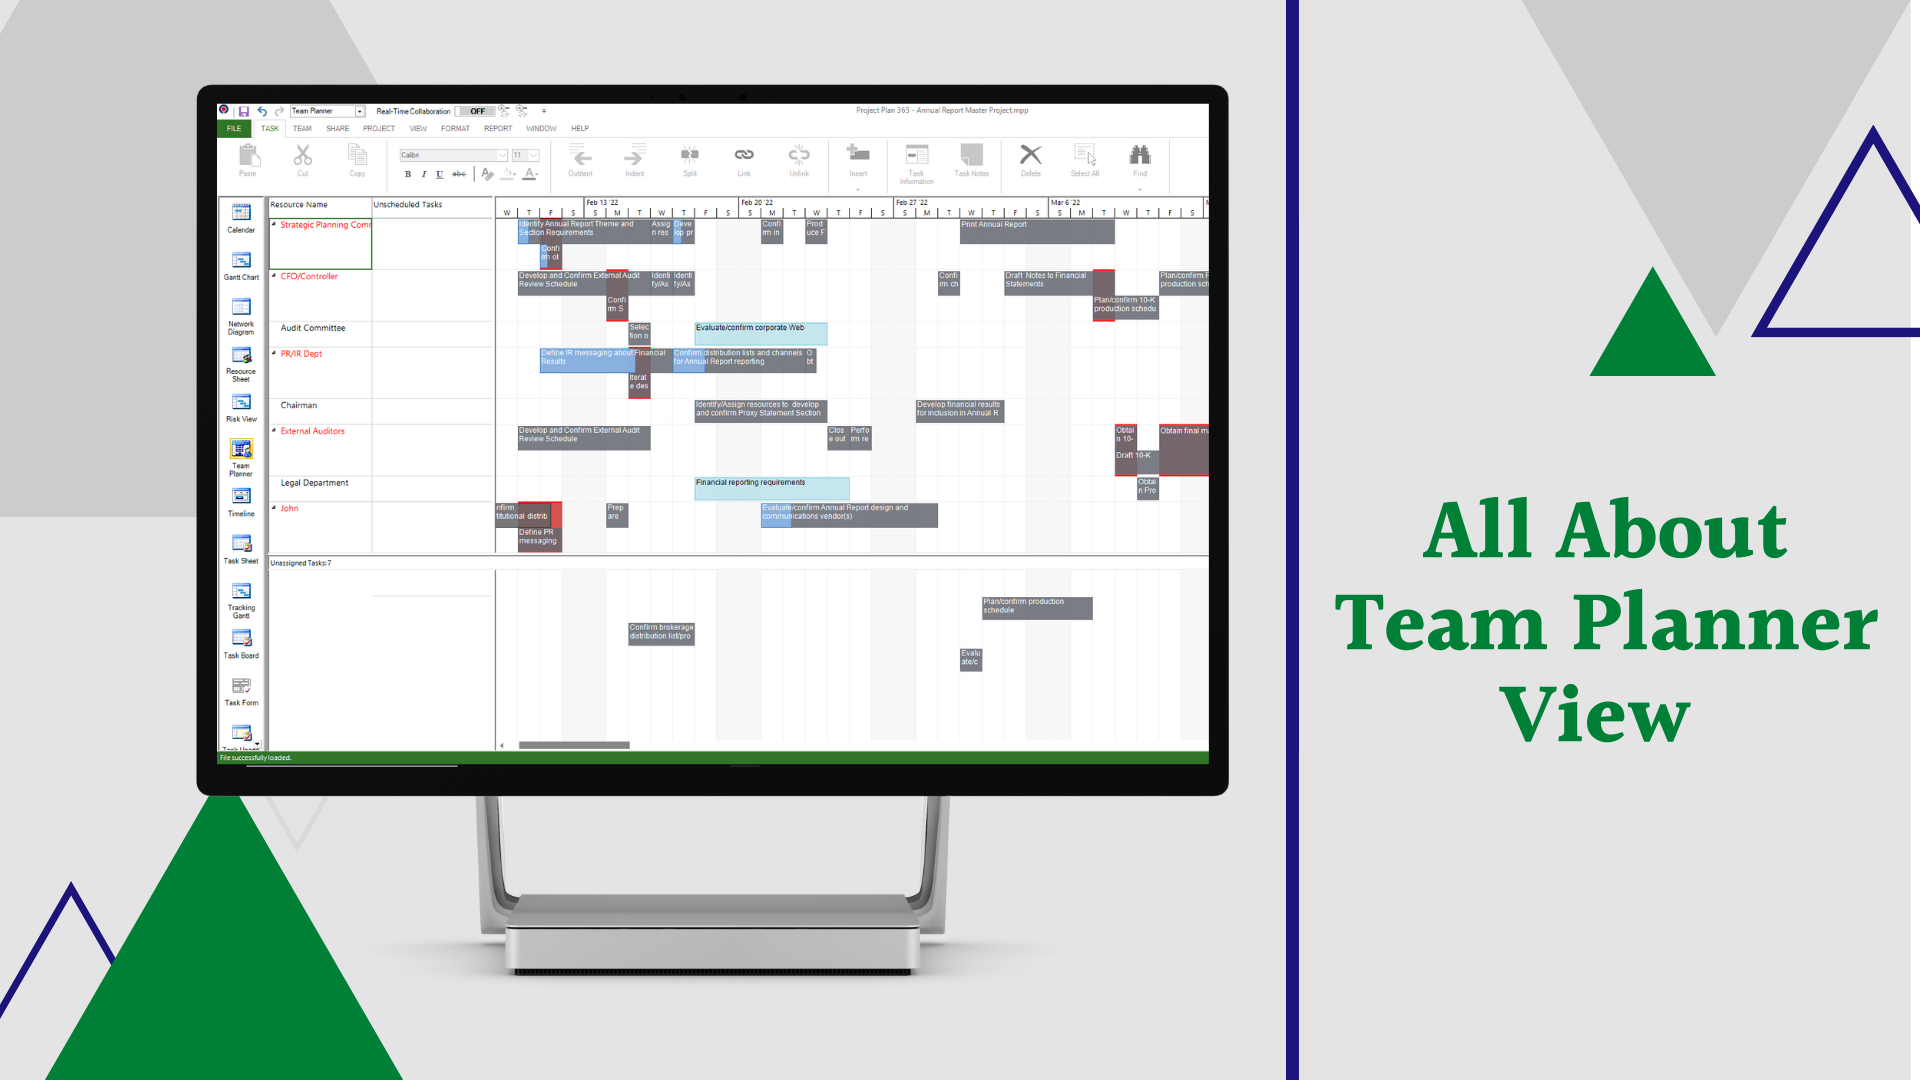 All About Team Planner View